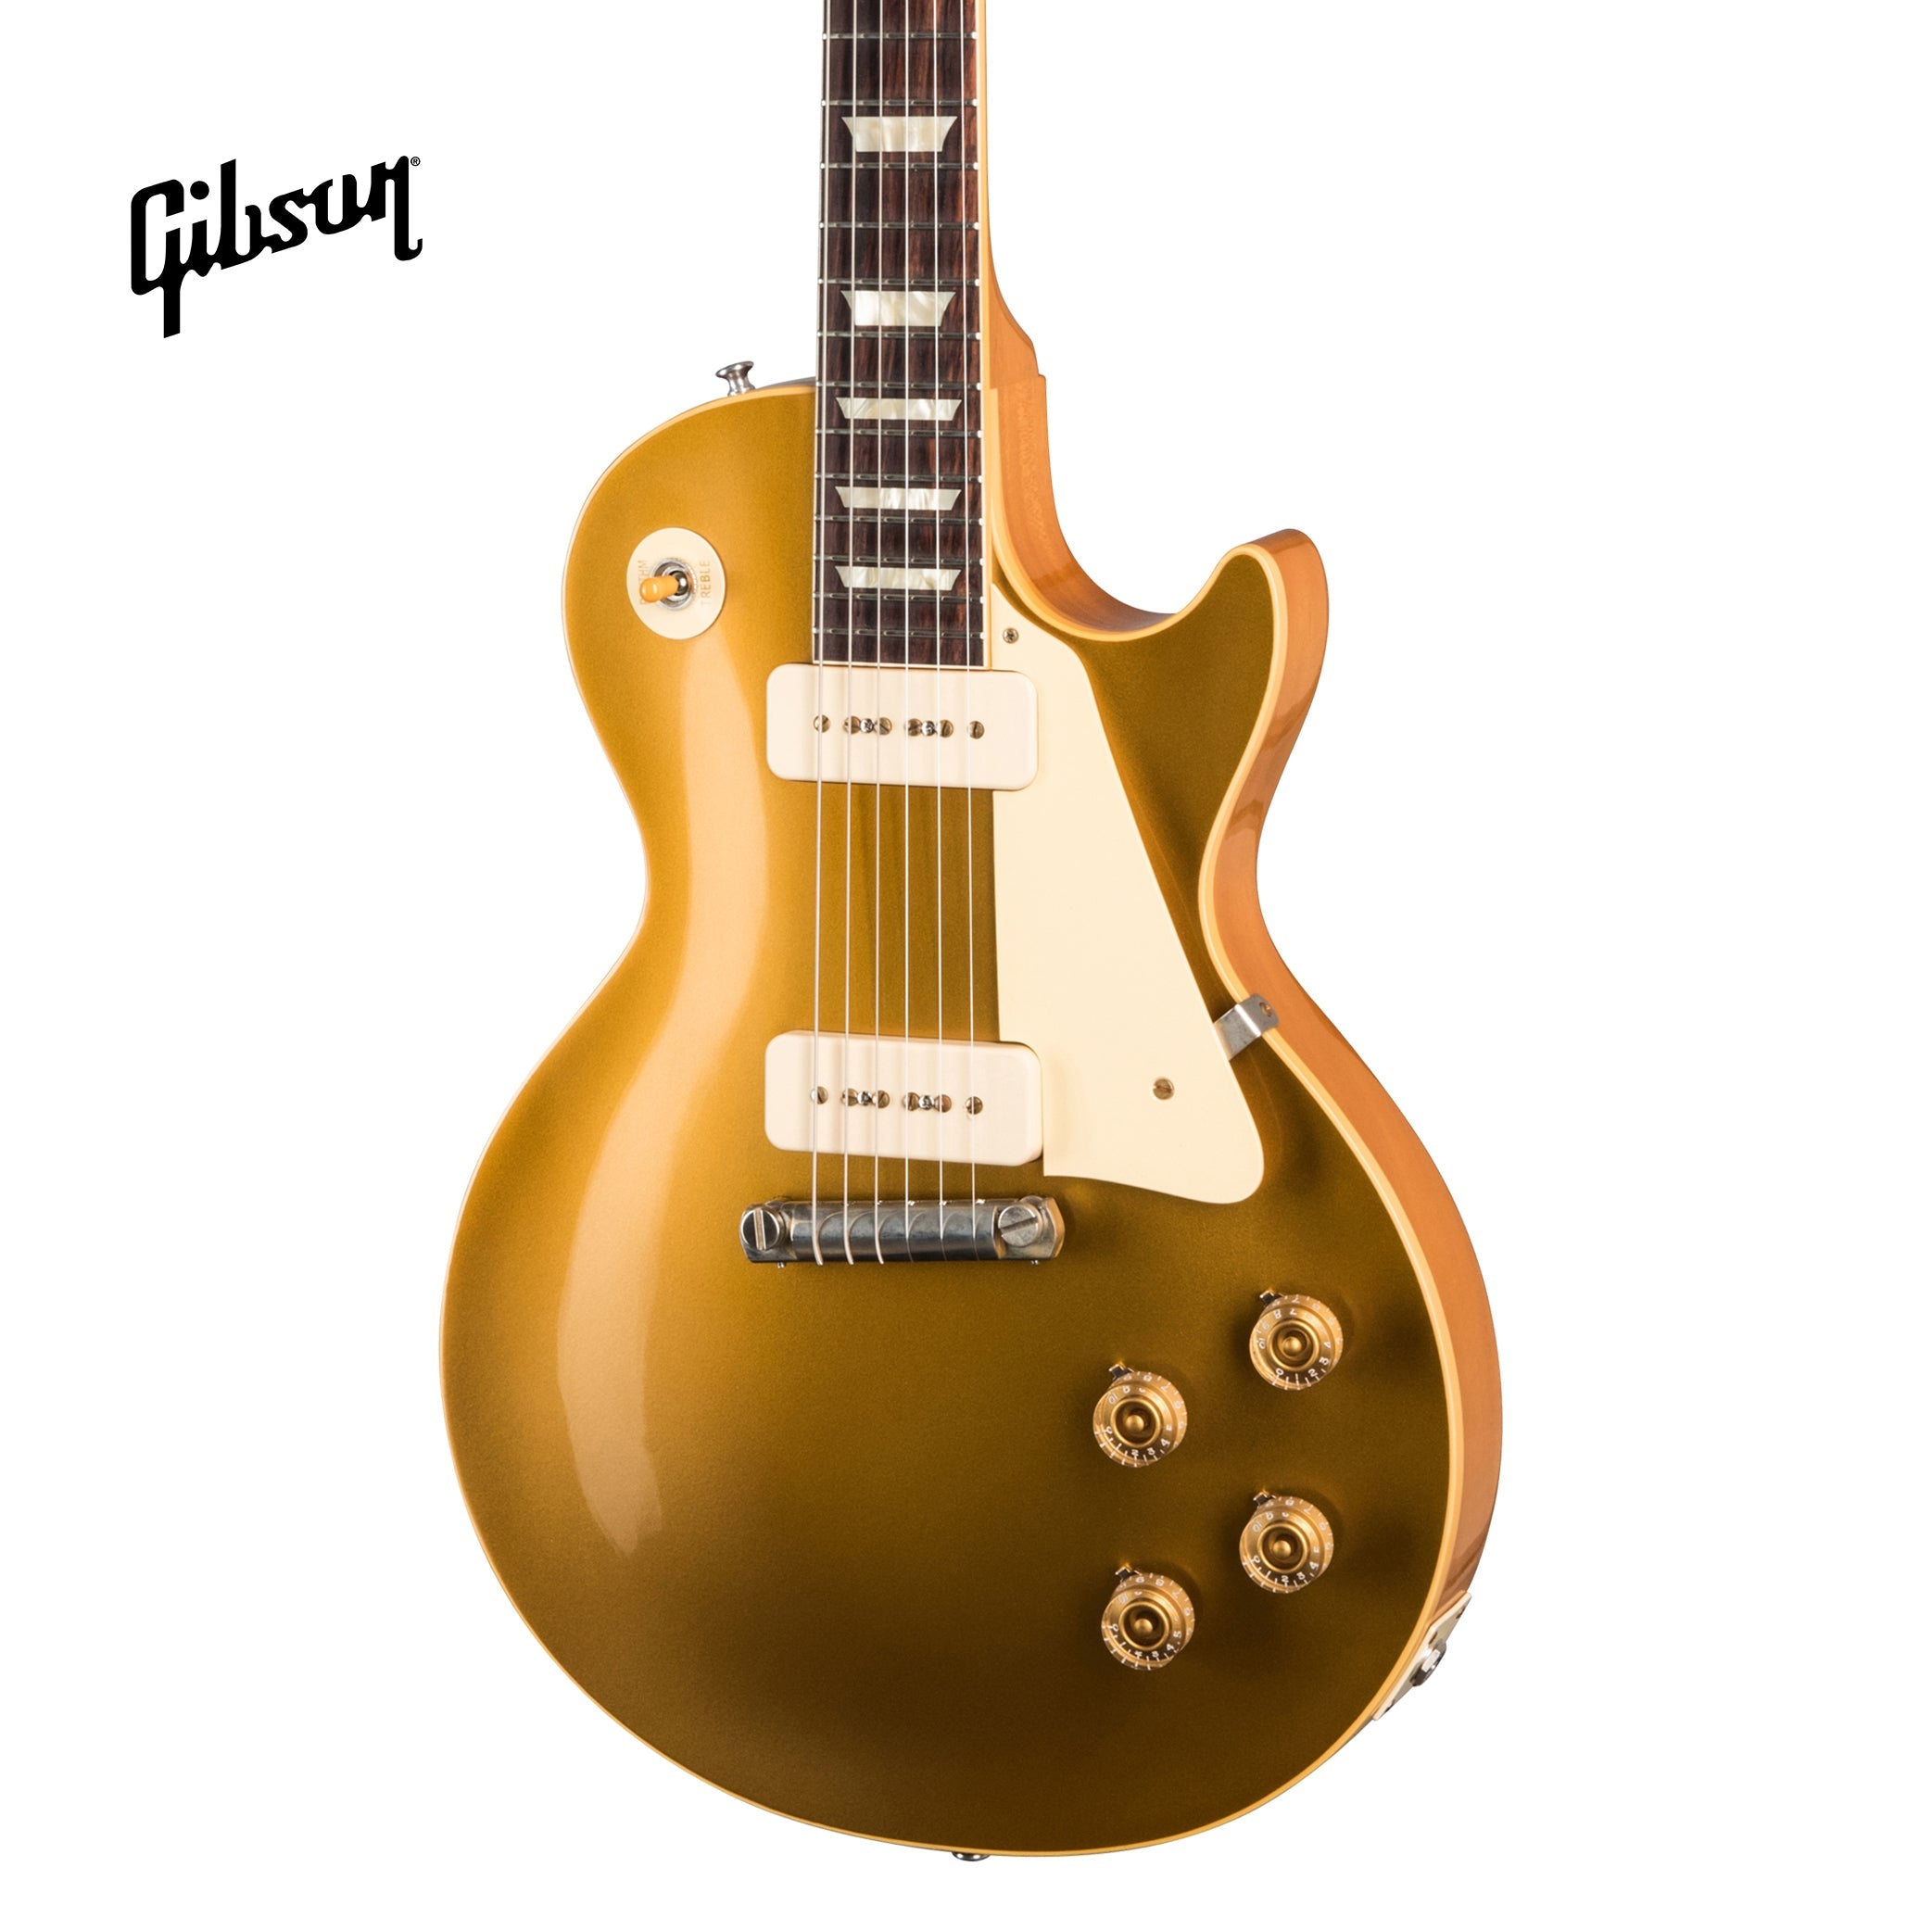 GIBSON 1954 LES PAUL REISSUE VOS ELECTRIC GUITAR - DOUBLE GOLD